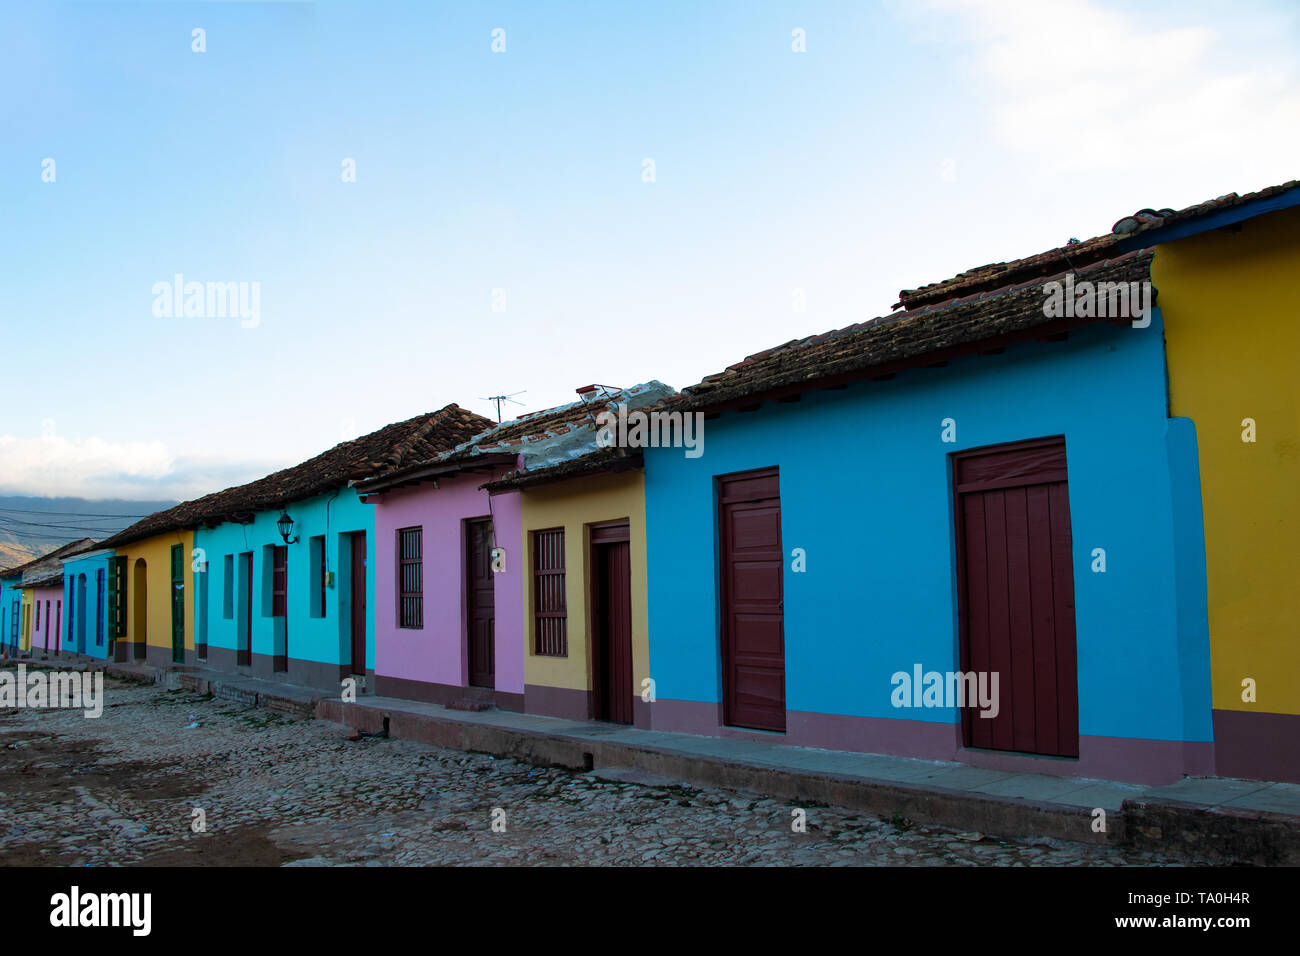 Street view of colored houses in old town of Trinidad, Cuba Stock Photo